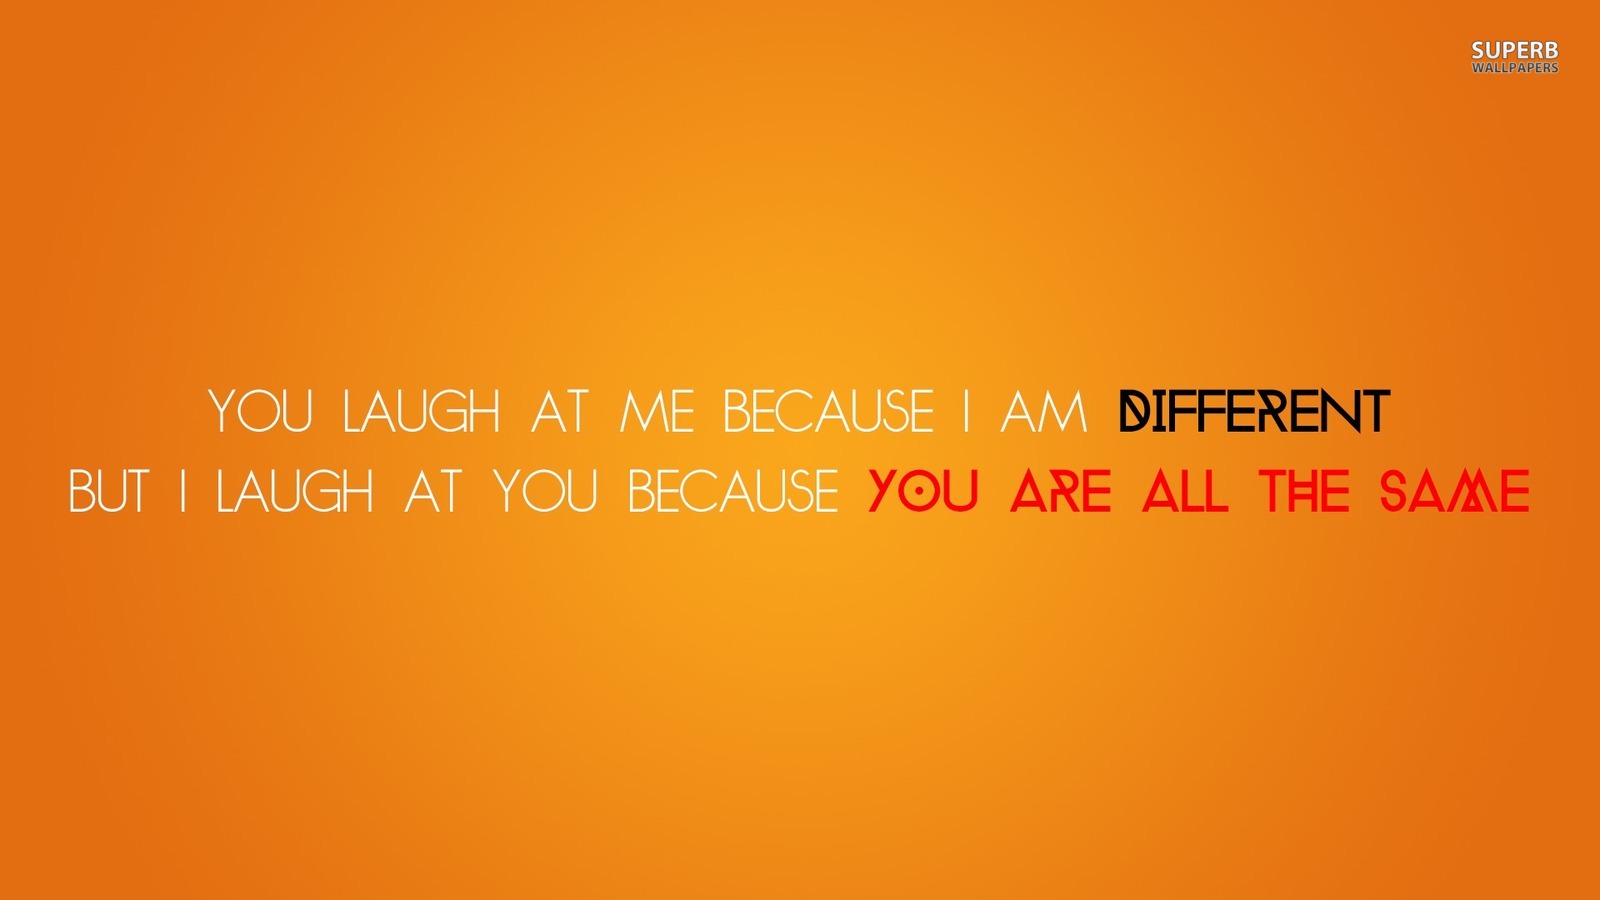 You laugh at me because I am different